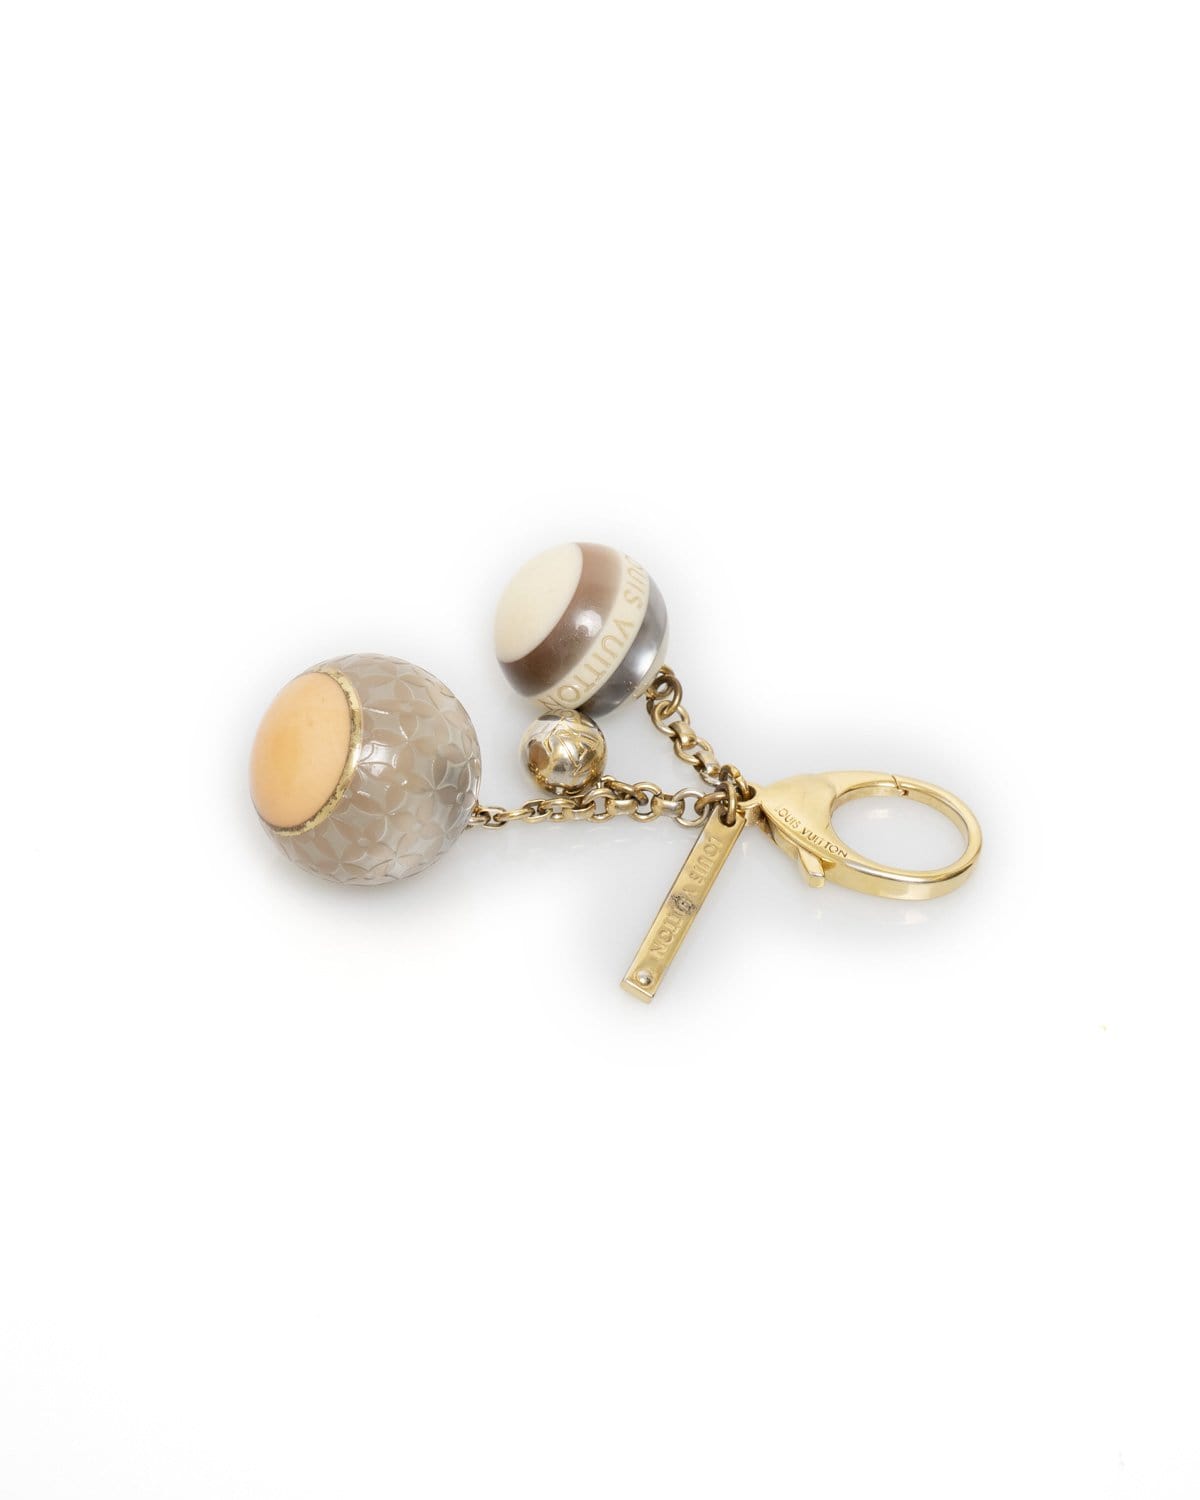 LuxuryPromise Louis Vuitton Triple Ball in Grey Bag Charm and Key Holder - AWL1755